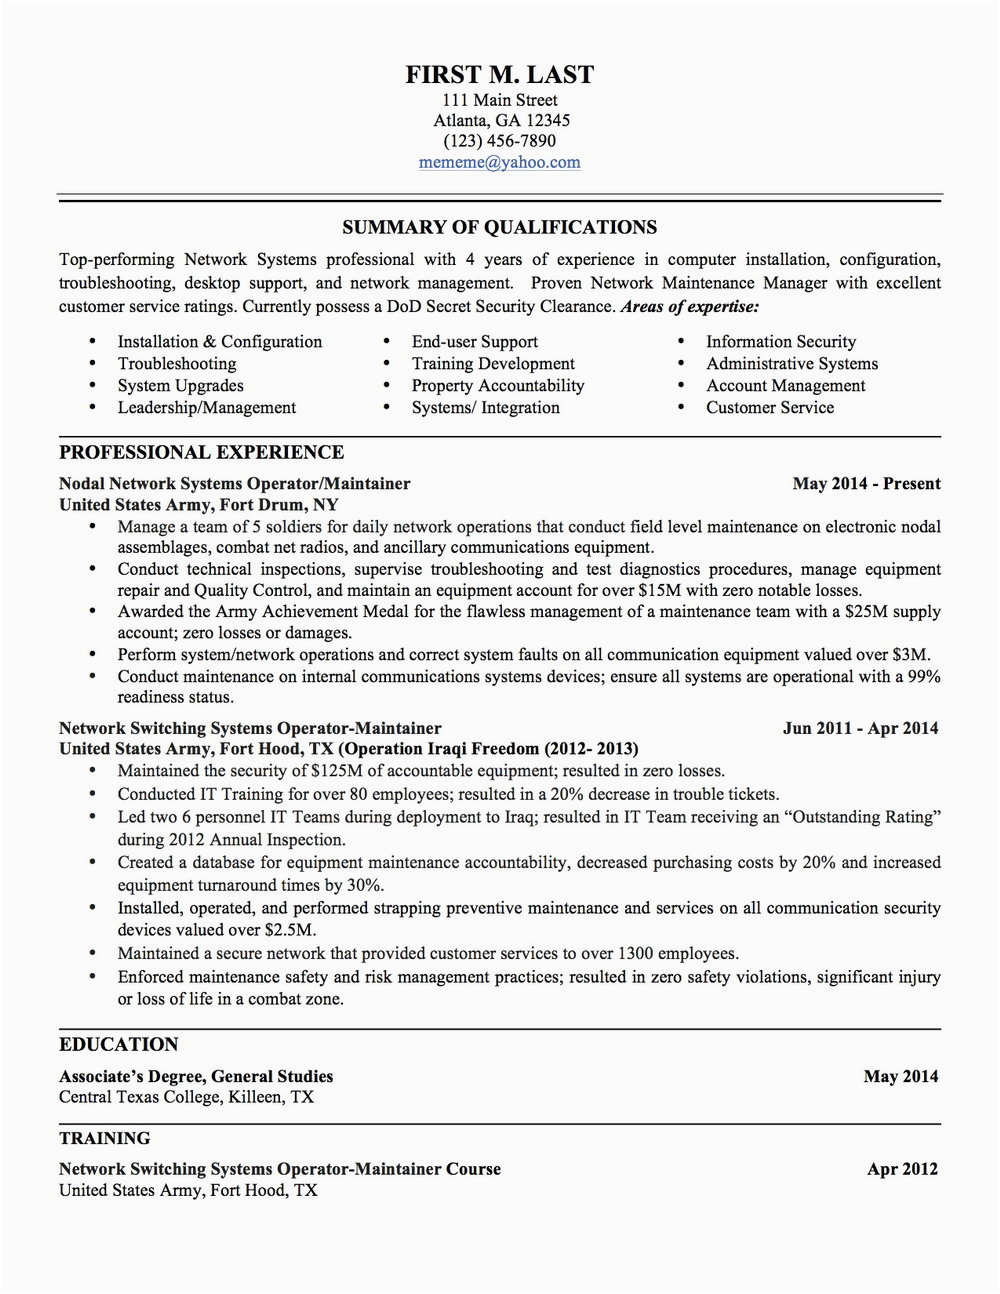 Sample Civilian Resume with Military Experience Military Resumes for Civilian Jobs Mryn ism